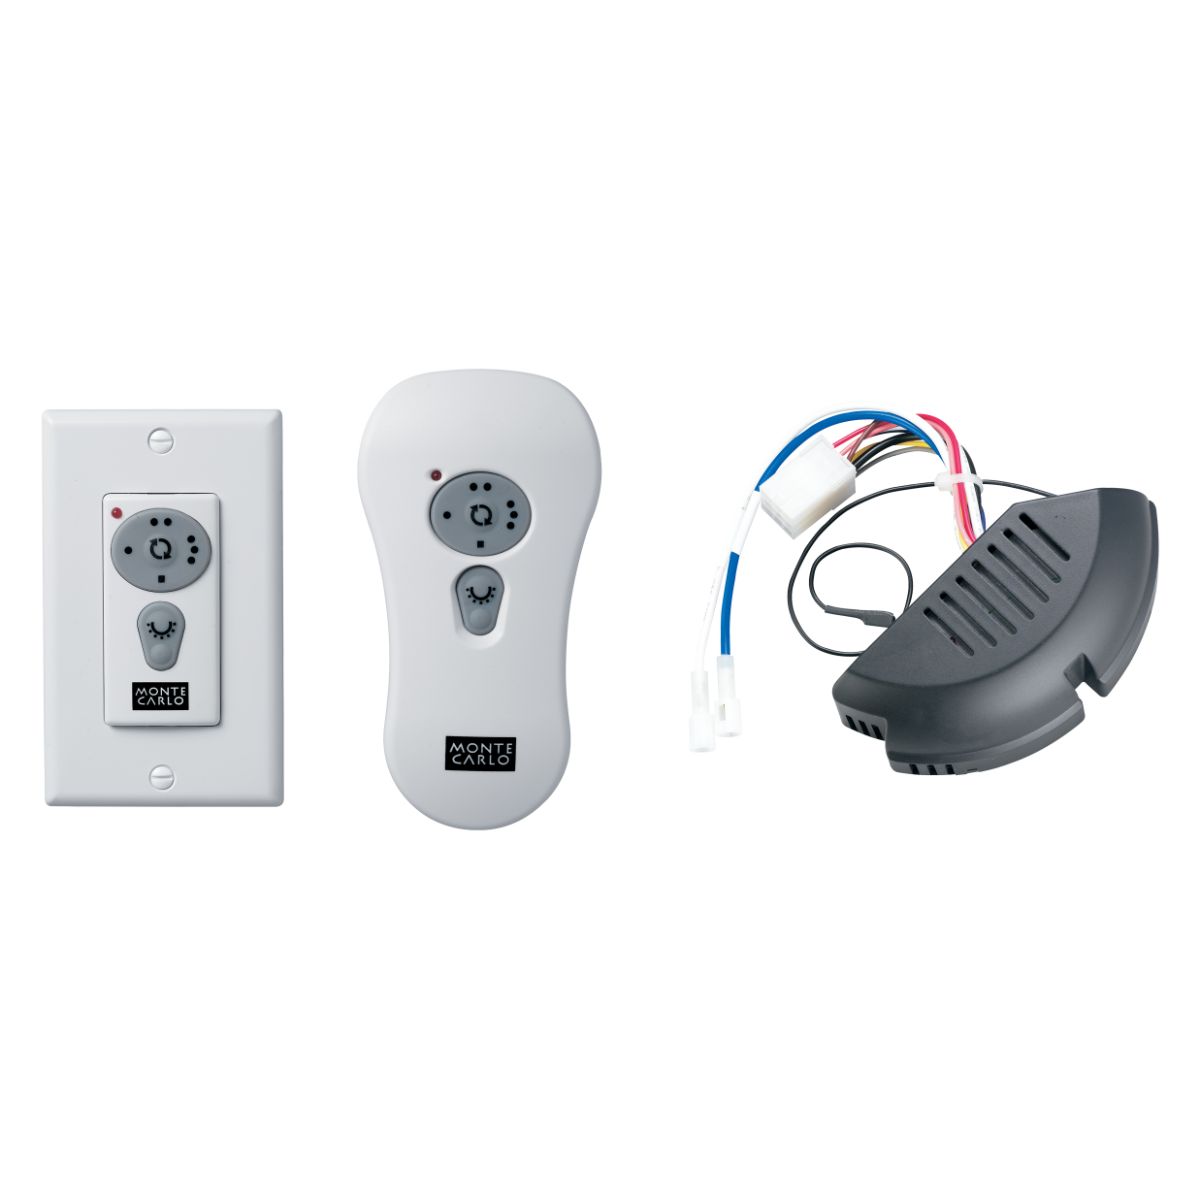 Reversible Wall/Hand-held Remote Control Kit White